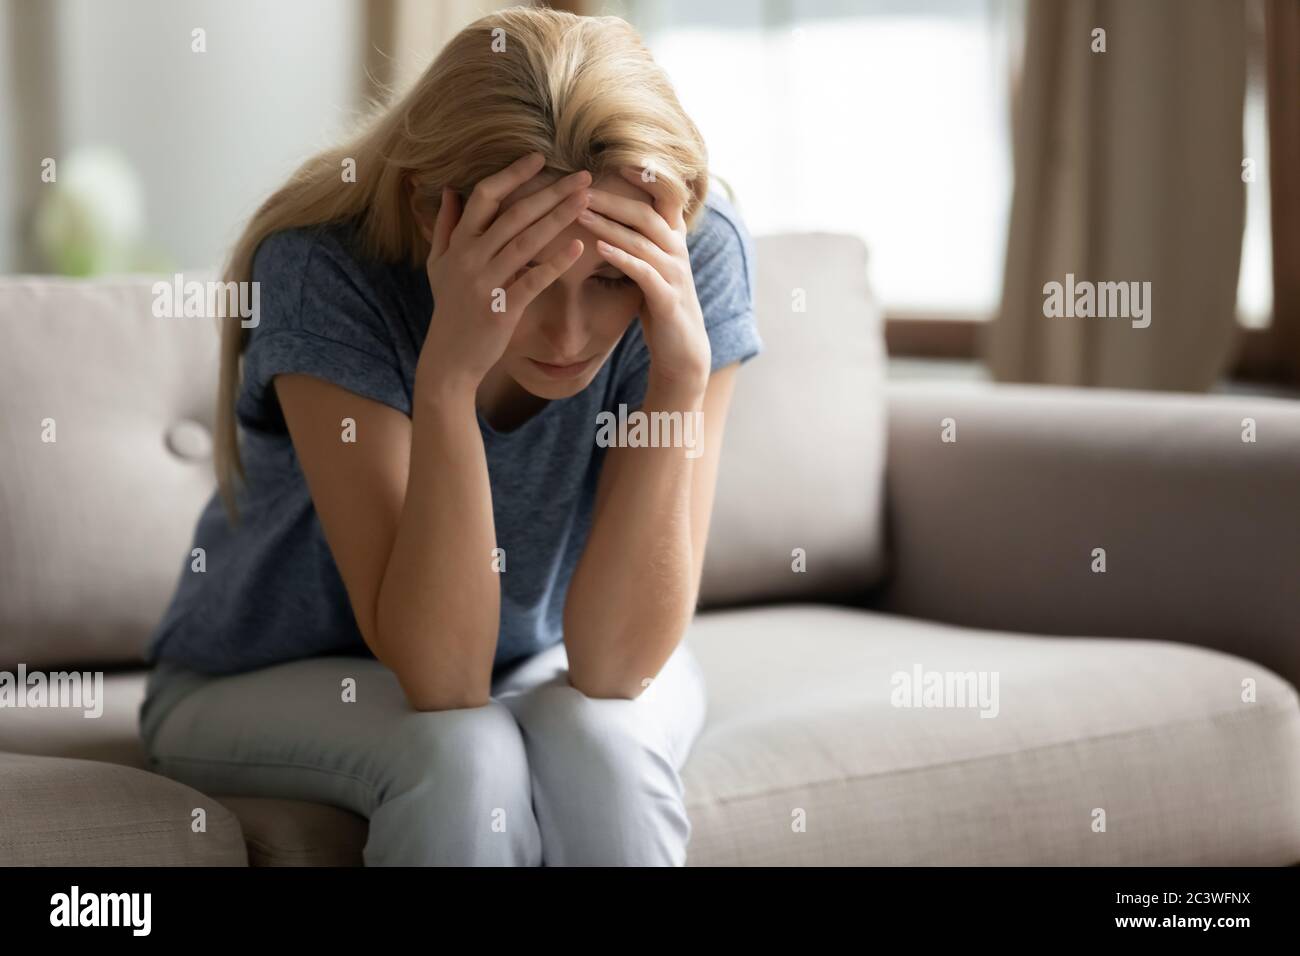 Unhappy woman suffers feels desperate goes through divorce Stock Photo